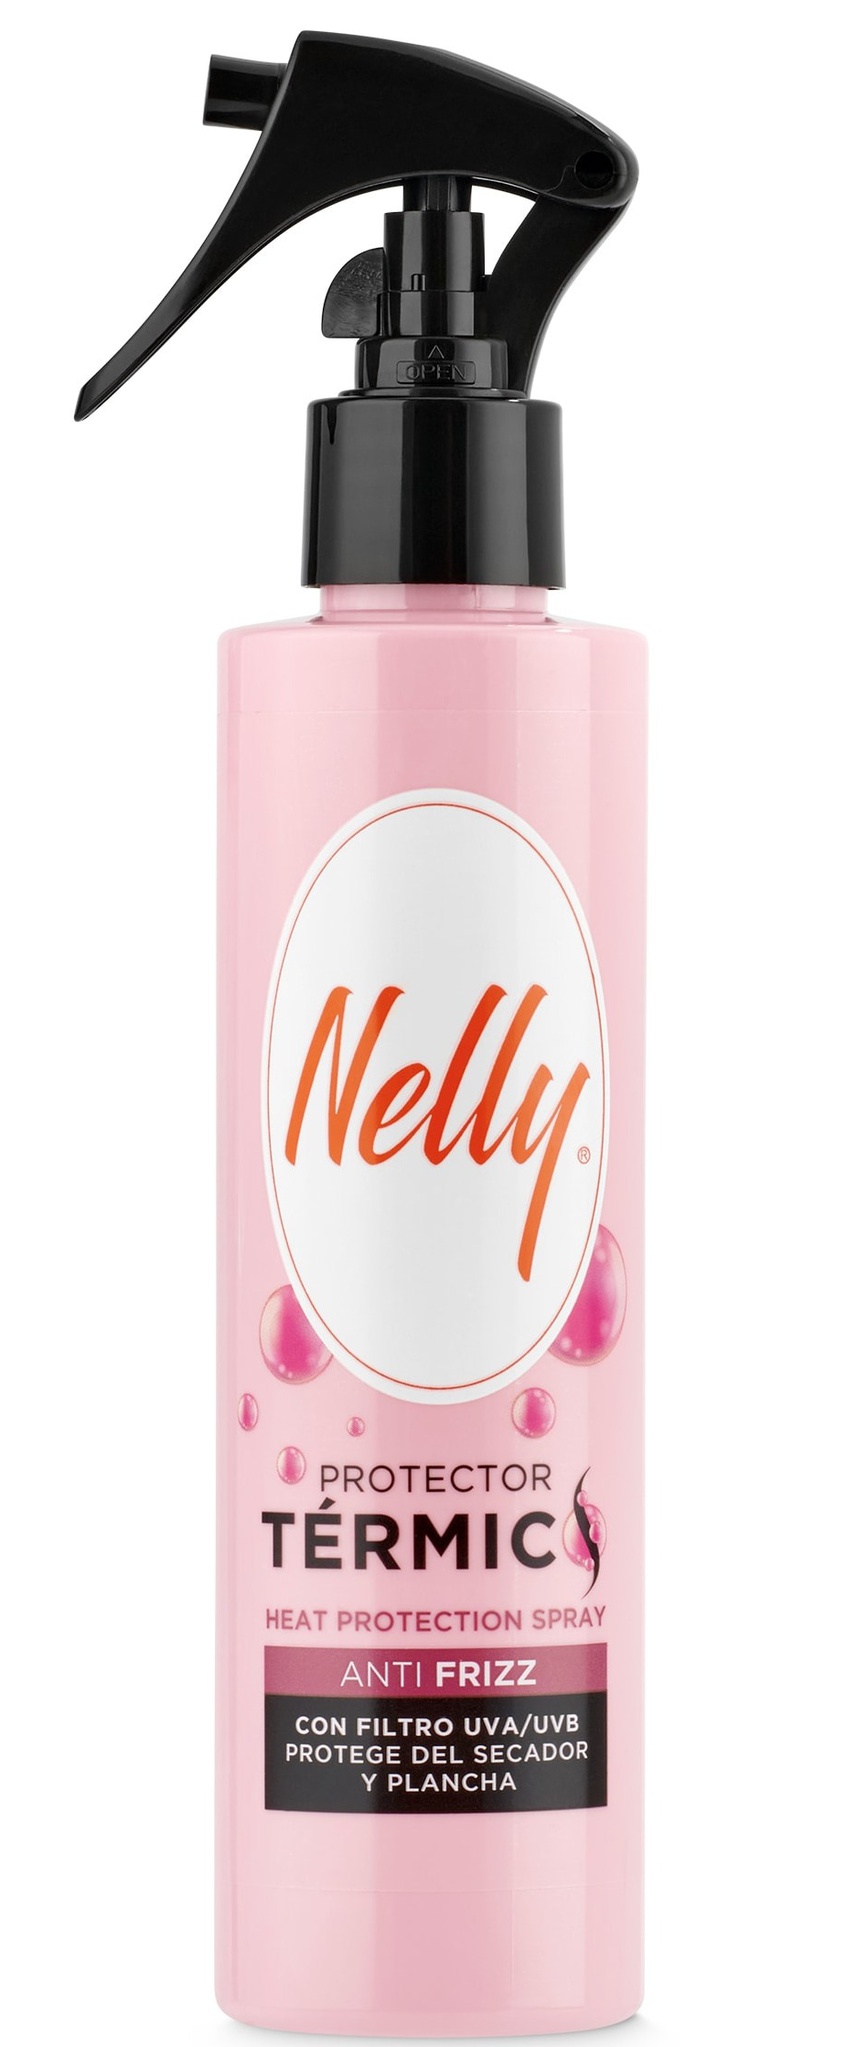 Nelly Protector Termic